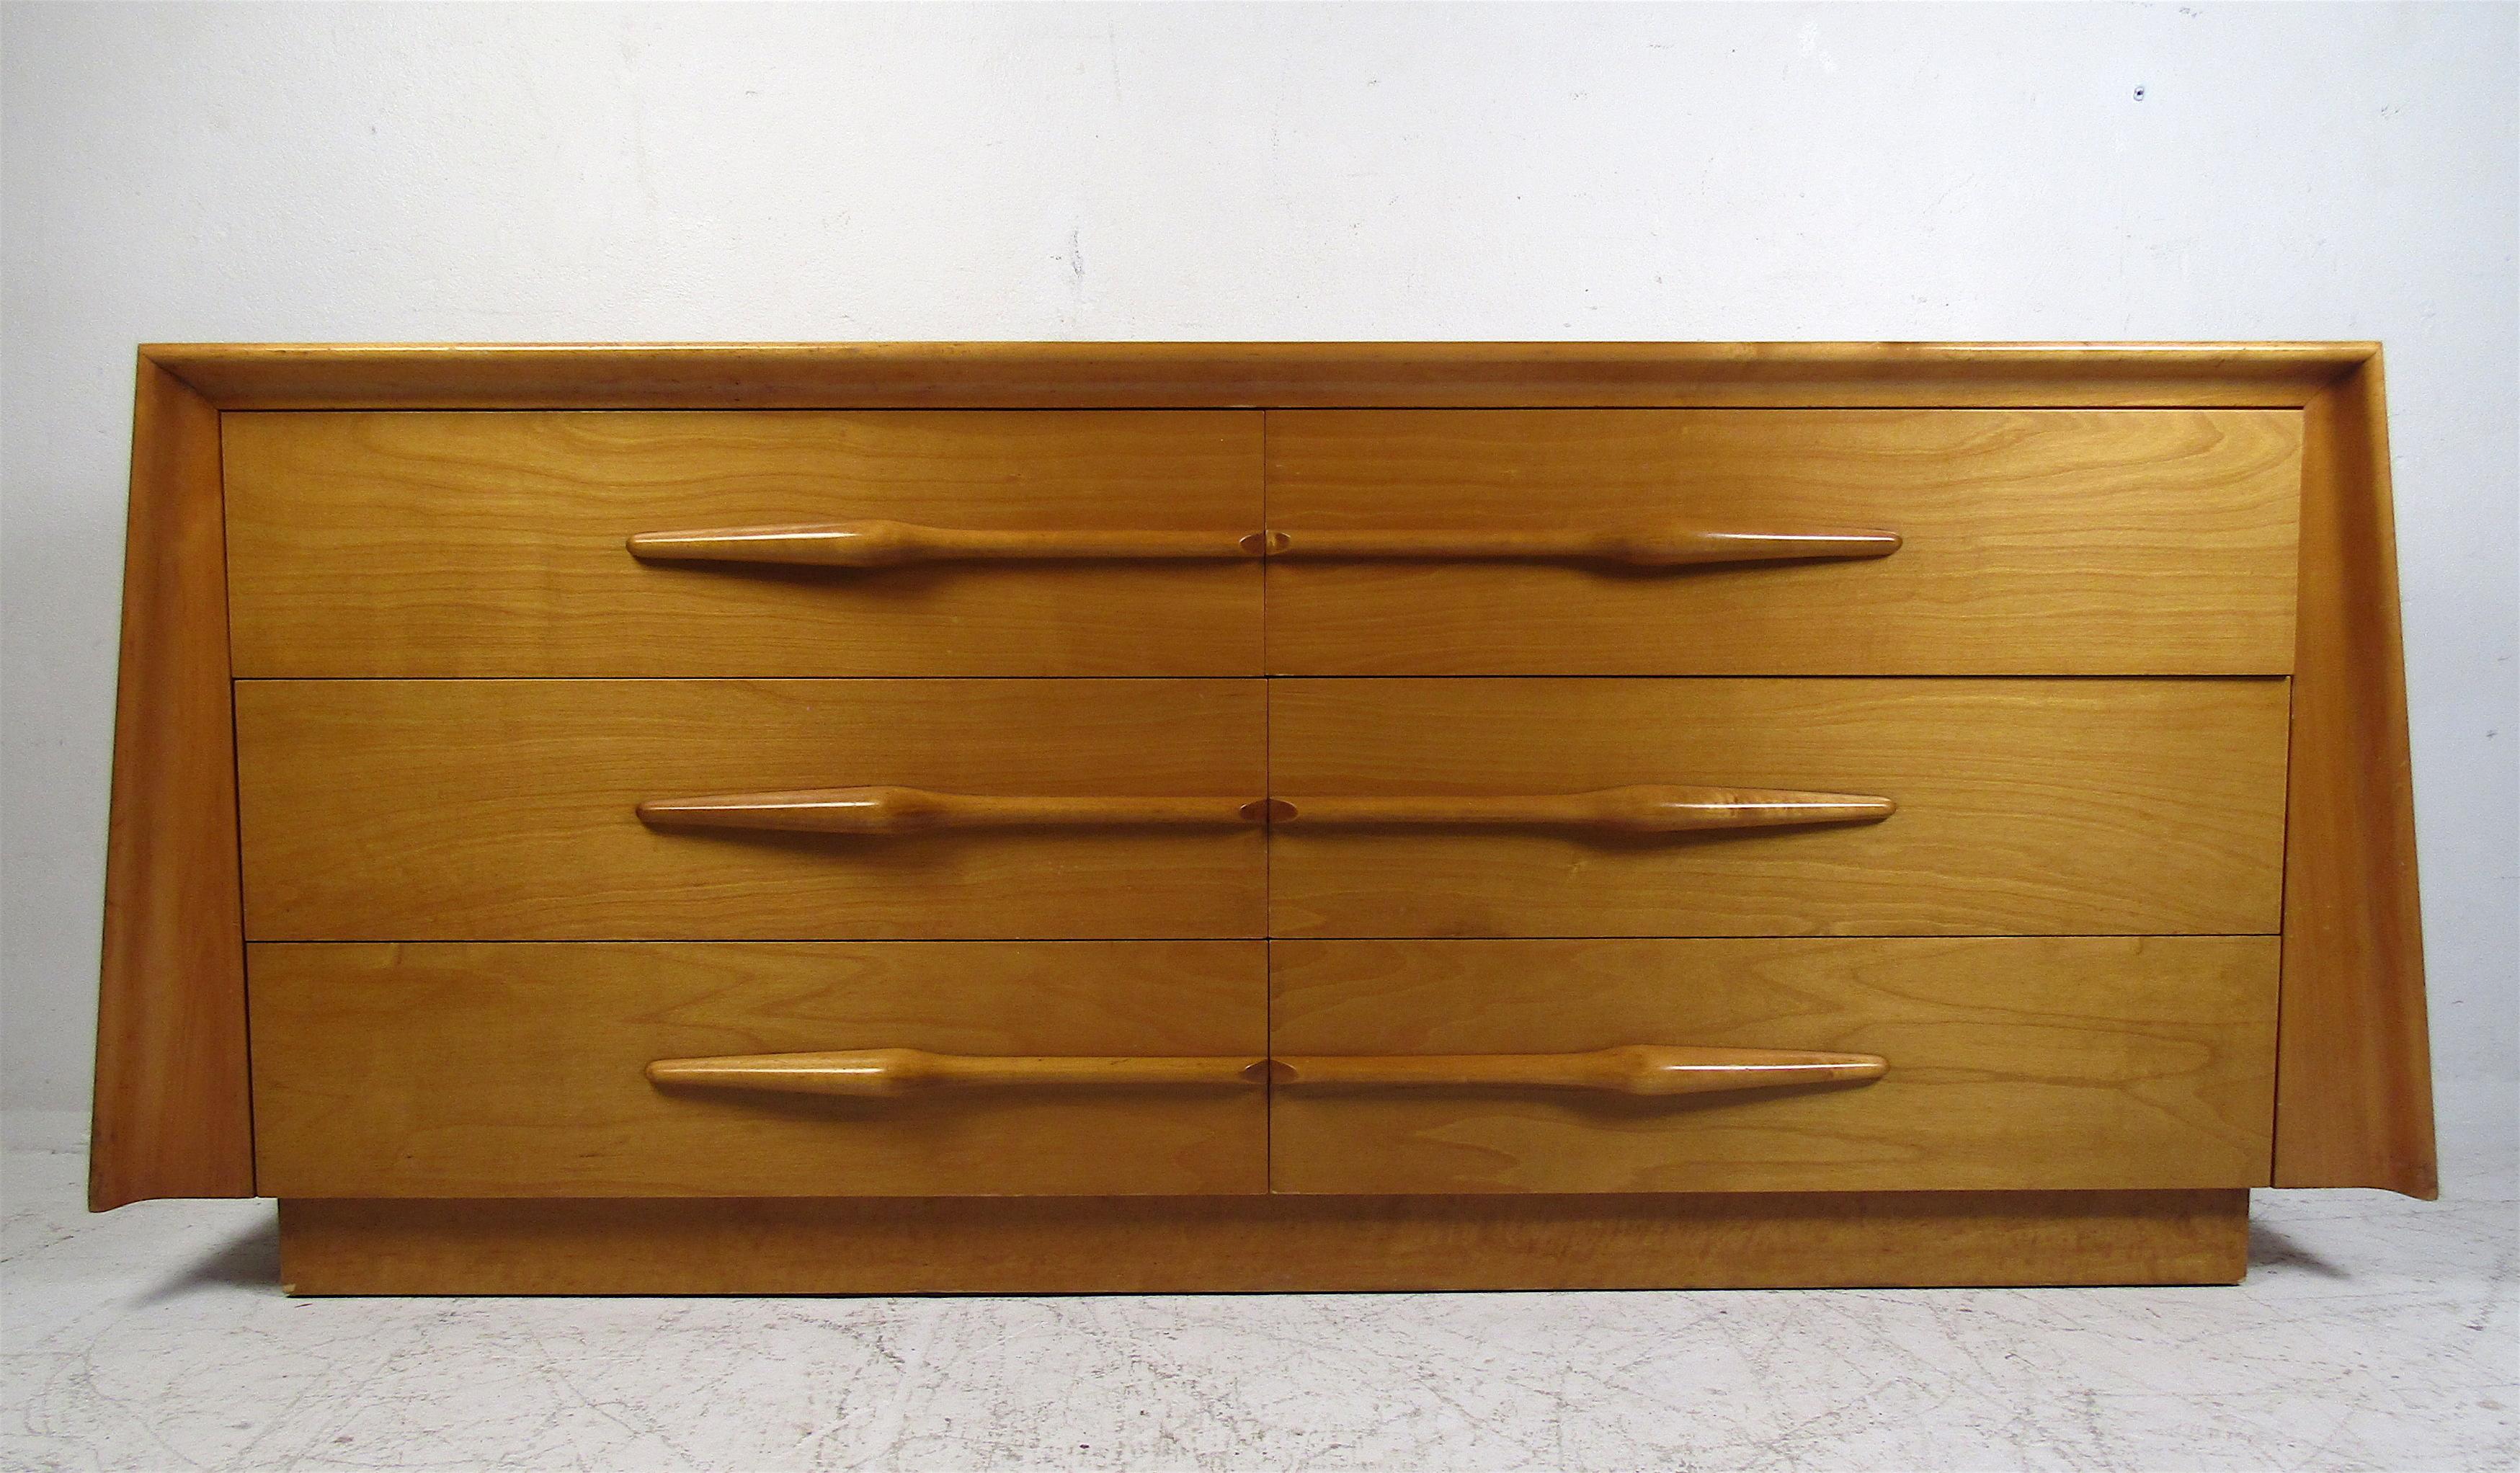 This stunning vintage modern bedroom set includes a dresser and two nightstands. The sculpted drawer pulls and angular design show quality construction. This set offers plenty of room for storage within its many drawers. Sleek case pieces with